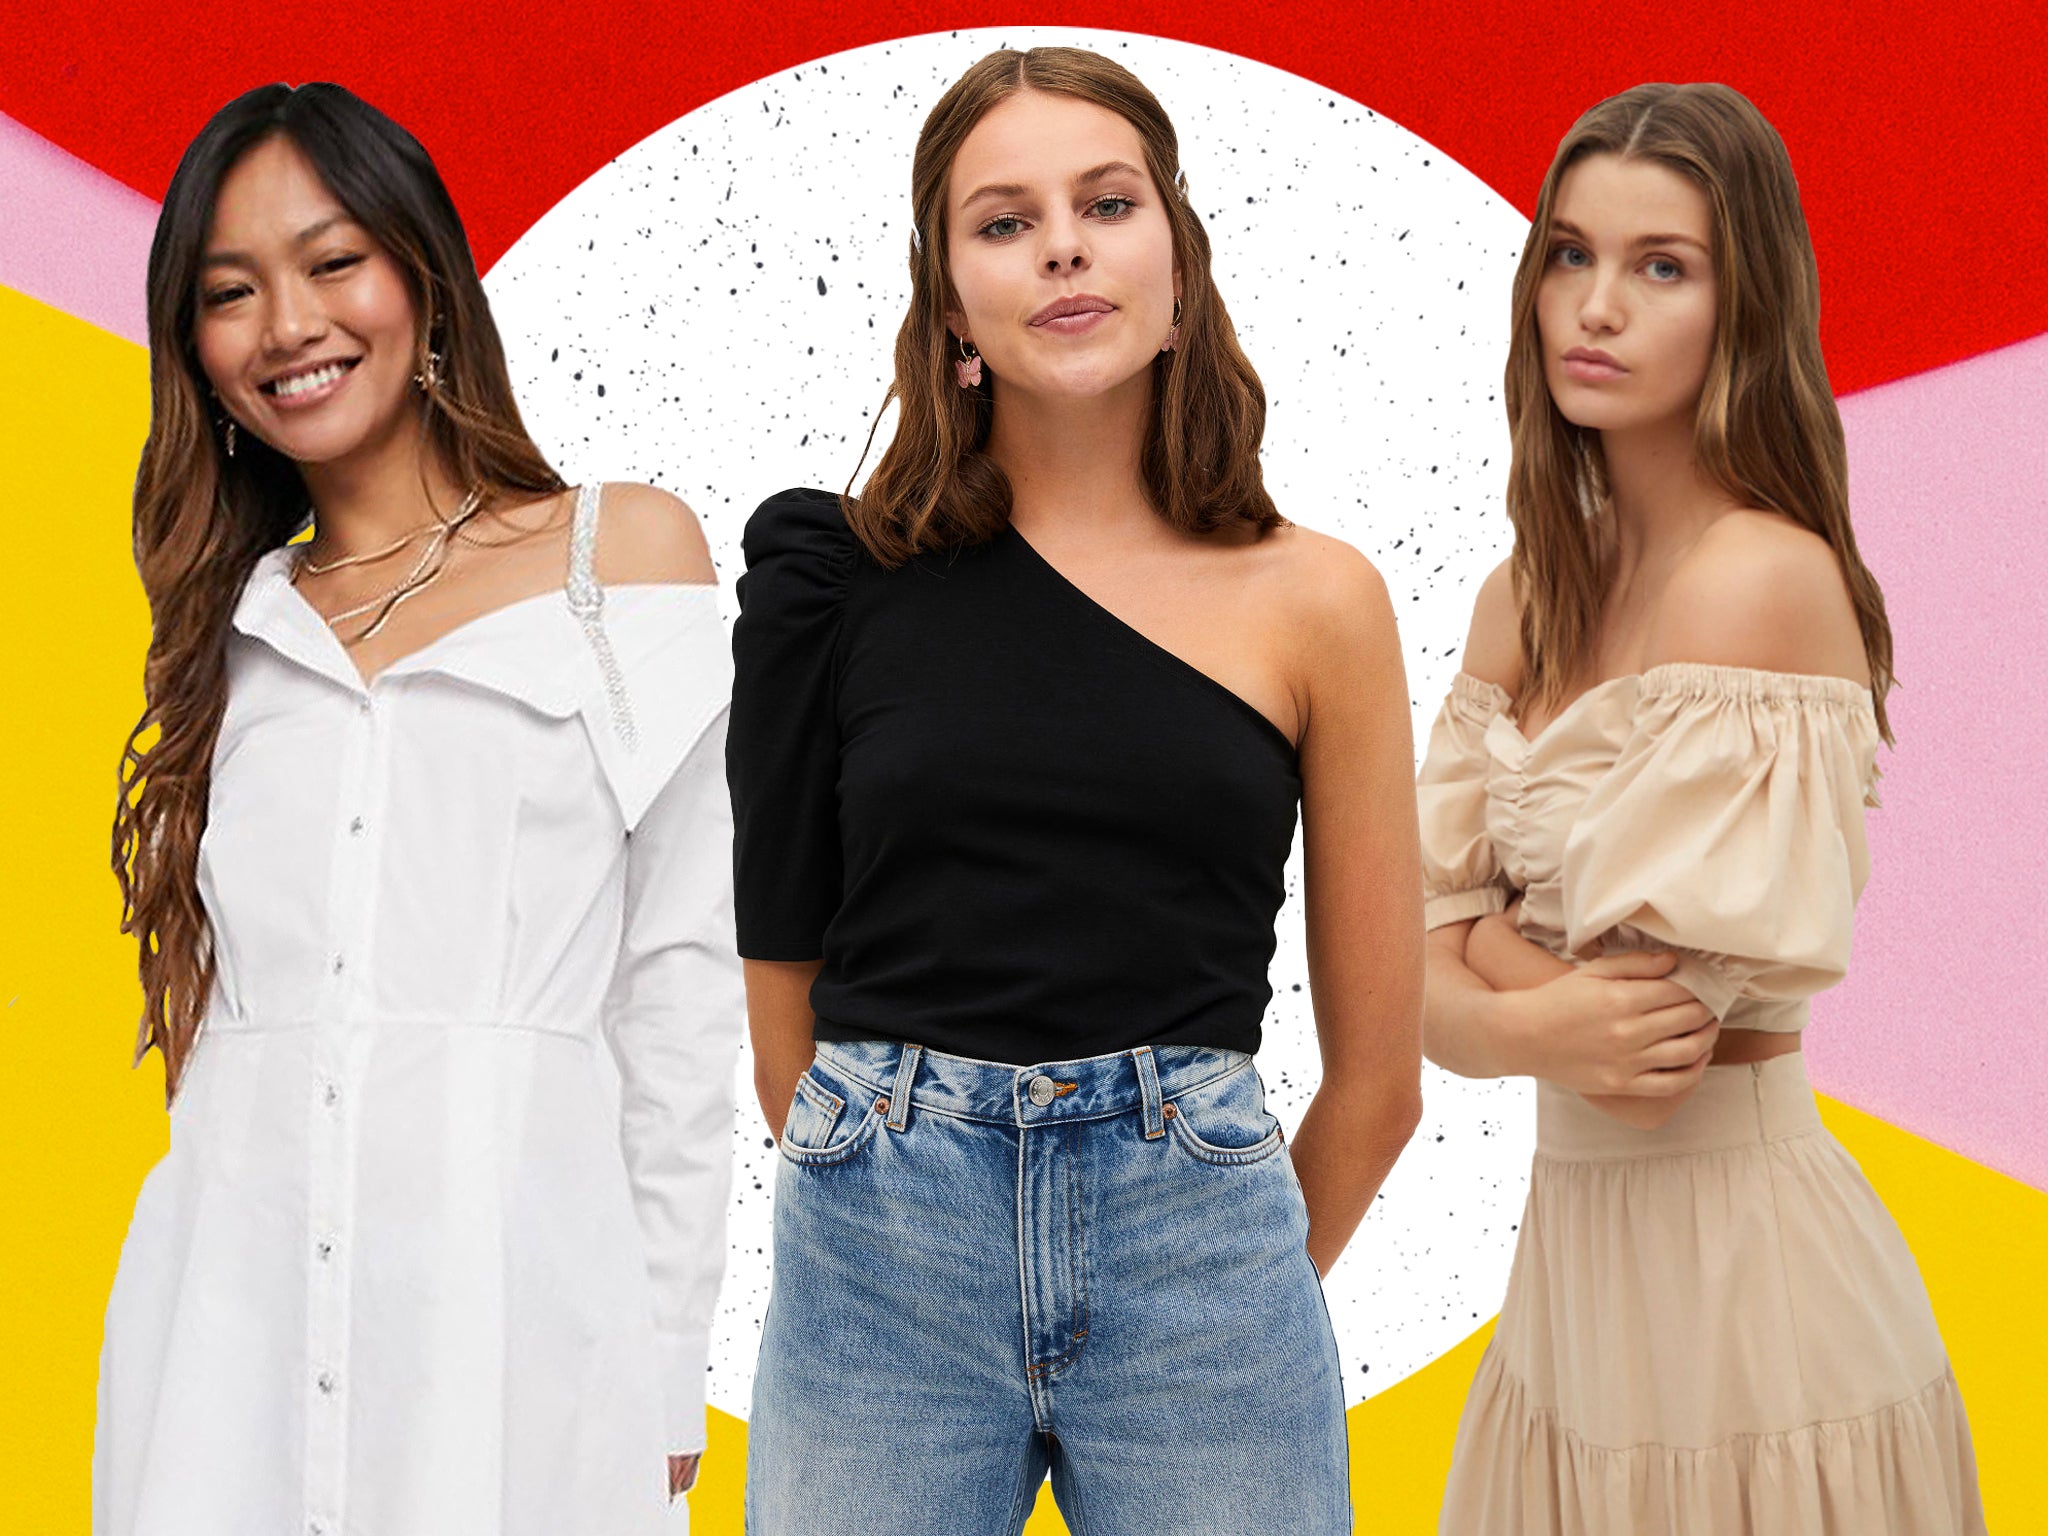 Whether they’re for your appointment or not, off-the-shoulder tops make a versatile addition to your wardrobe